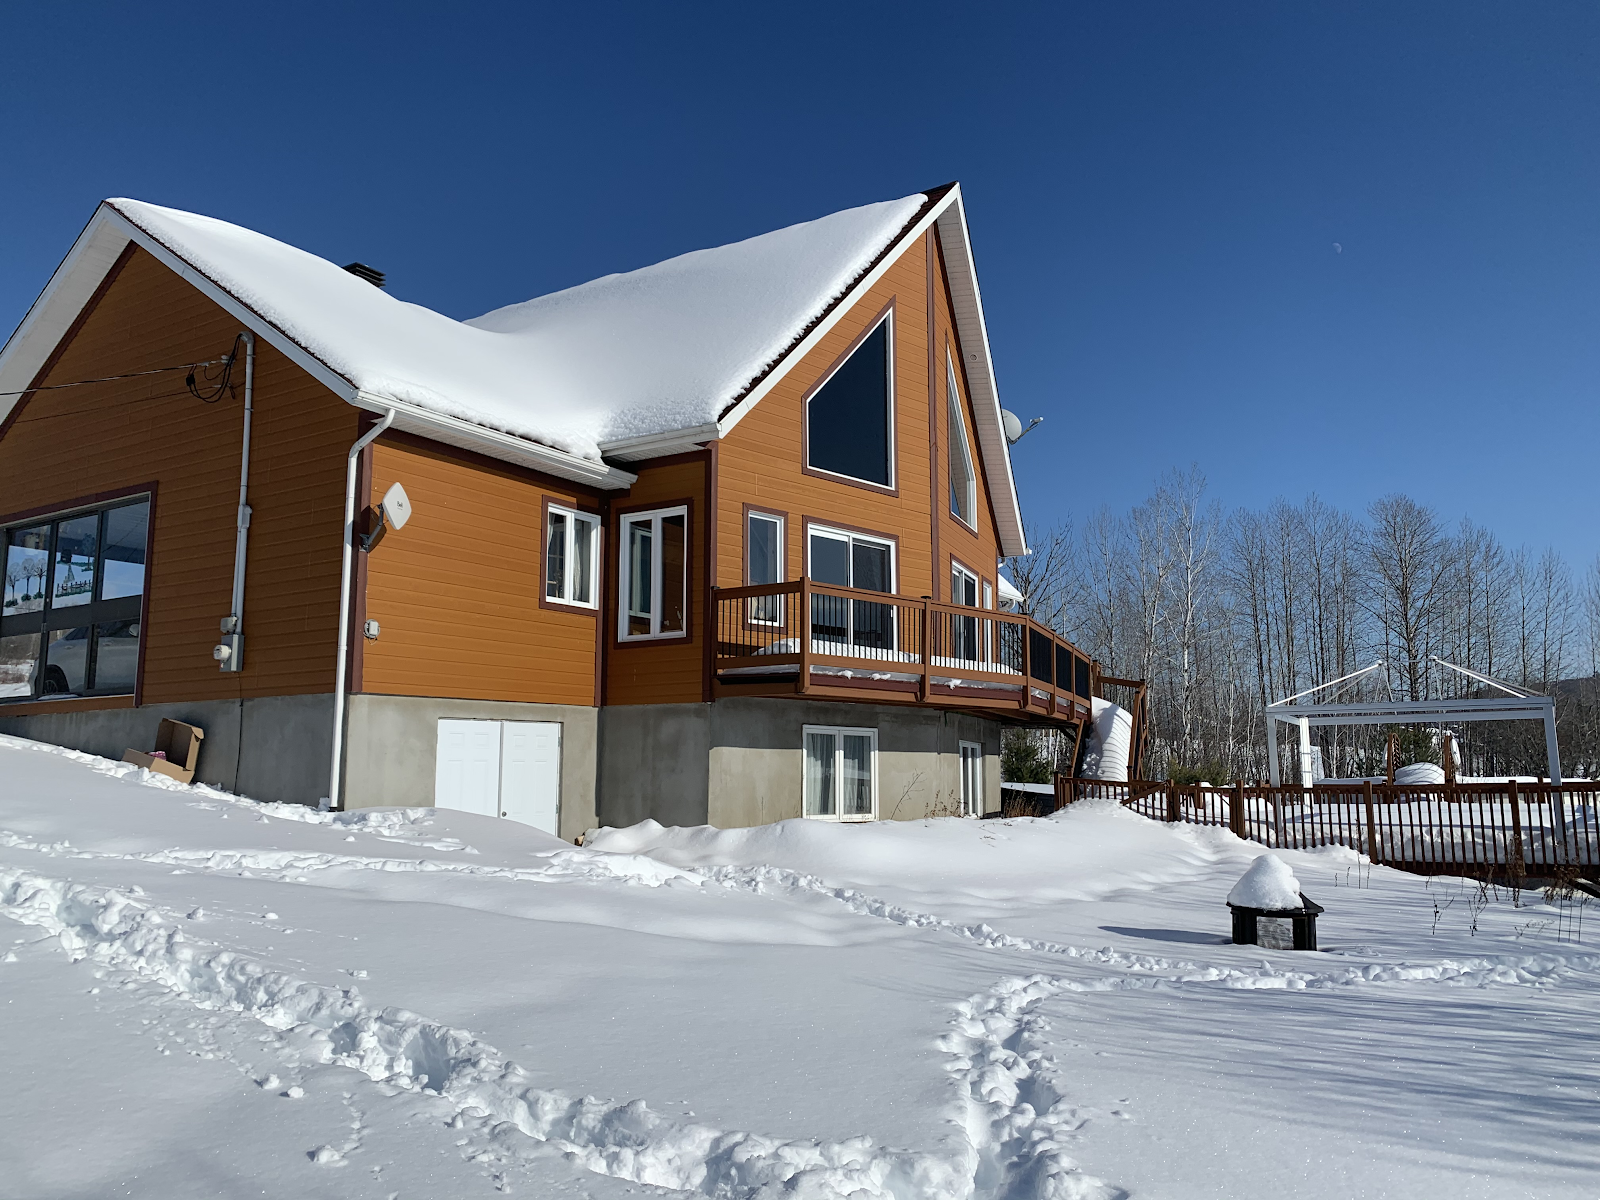 Cottages for rent for 10 people in Quebec #10